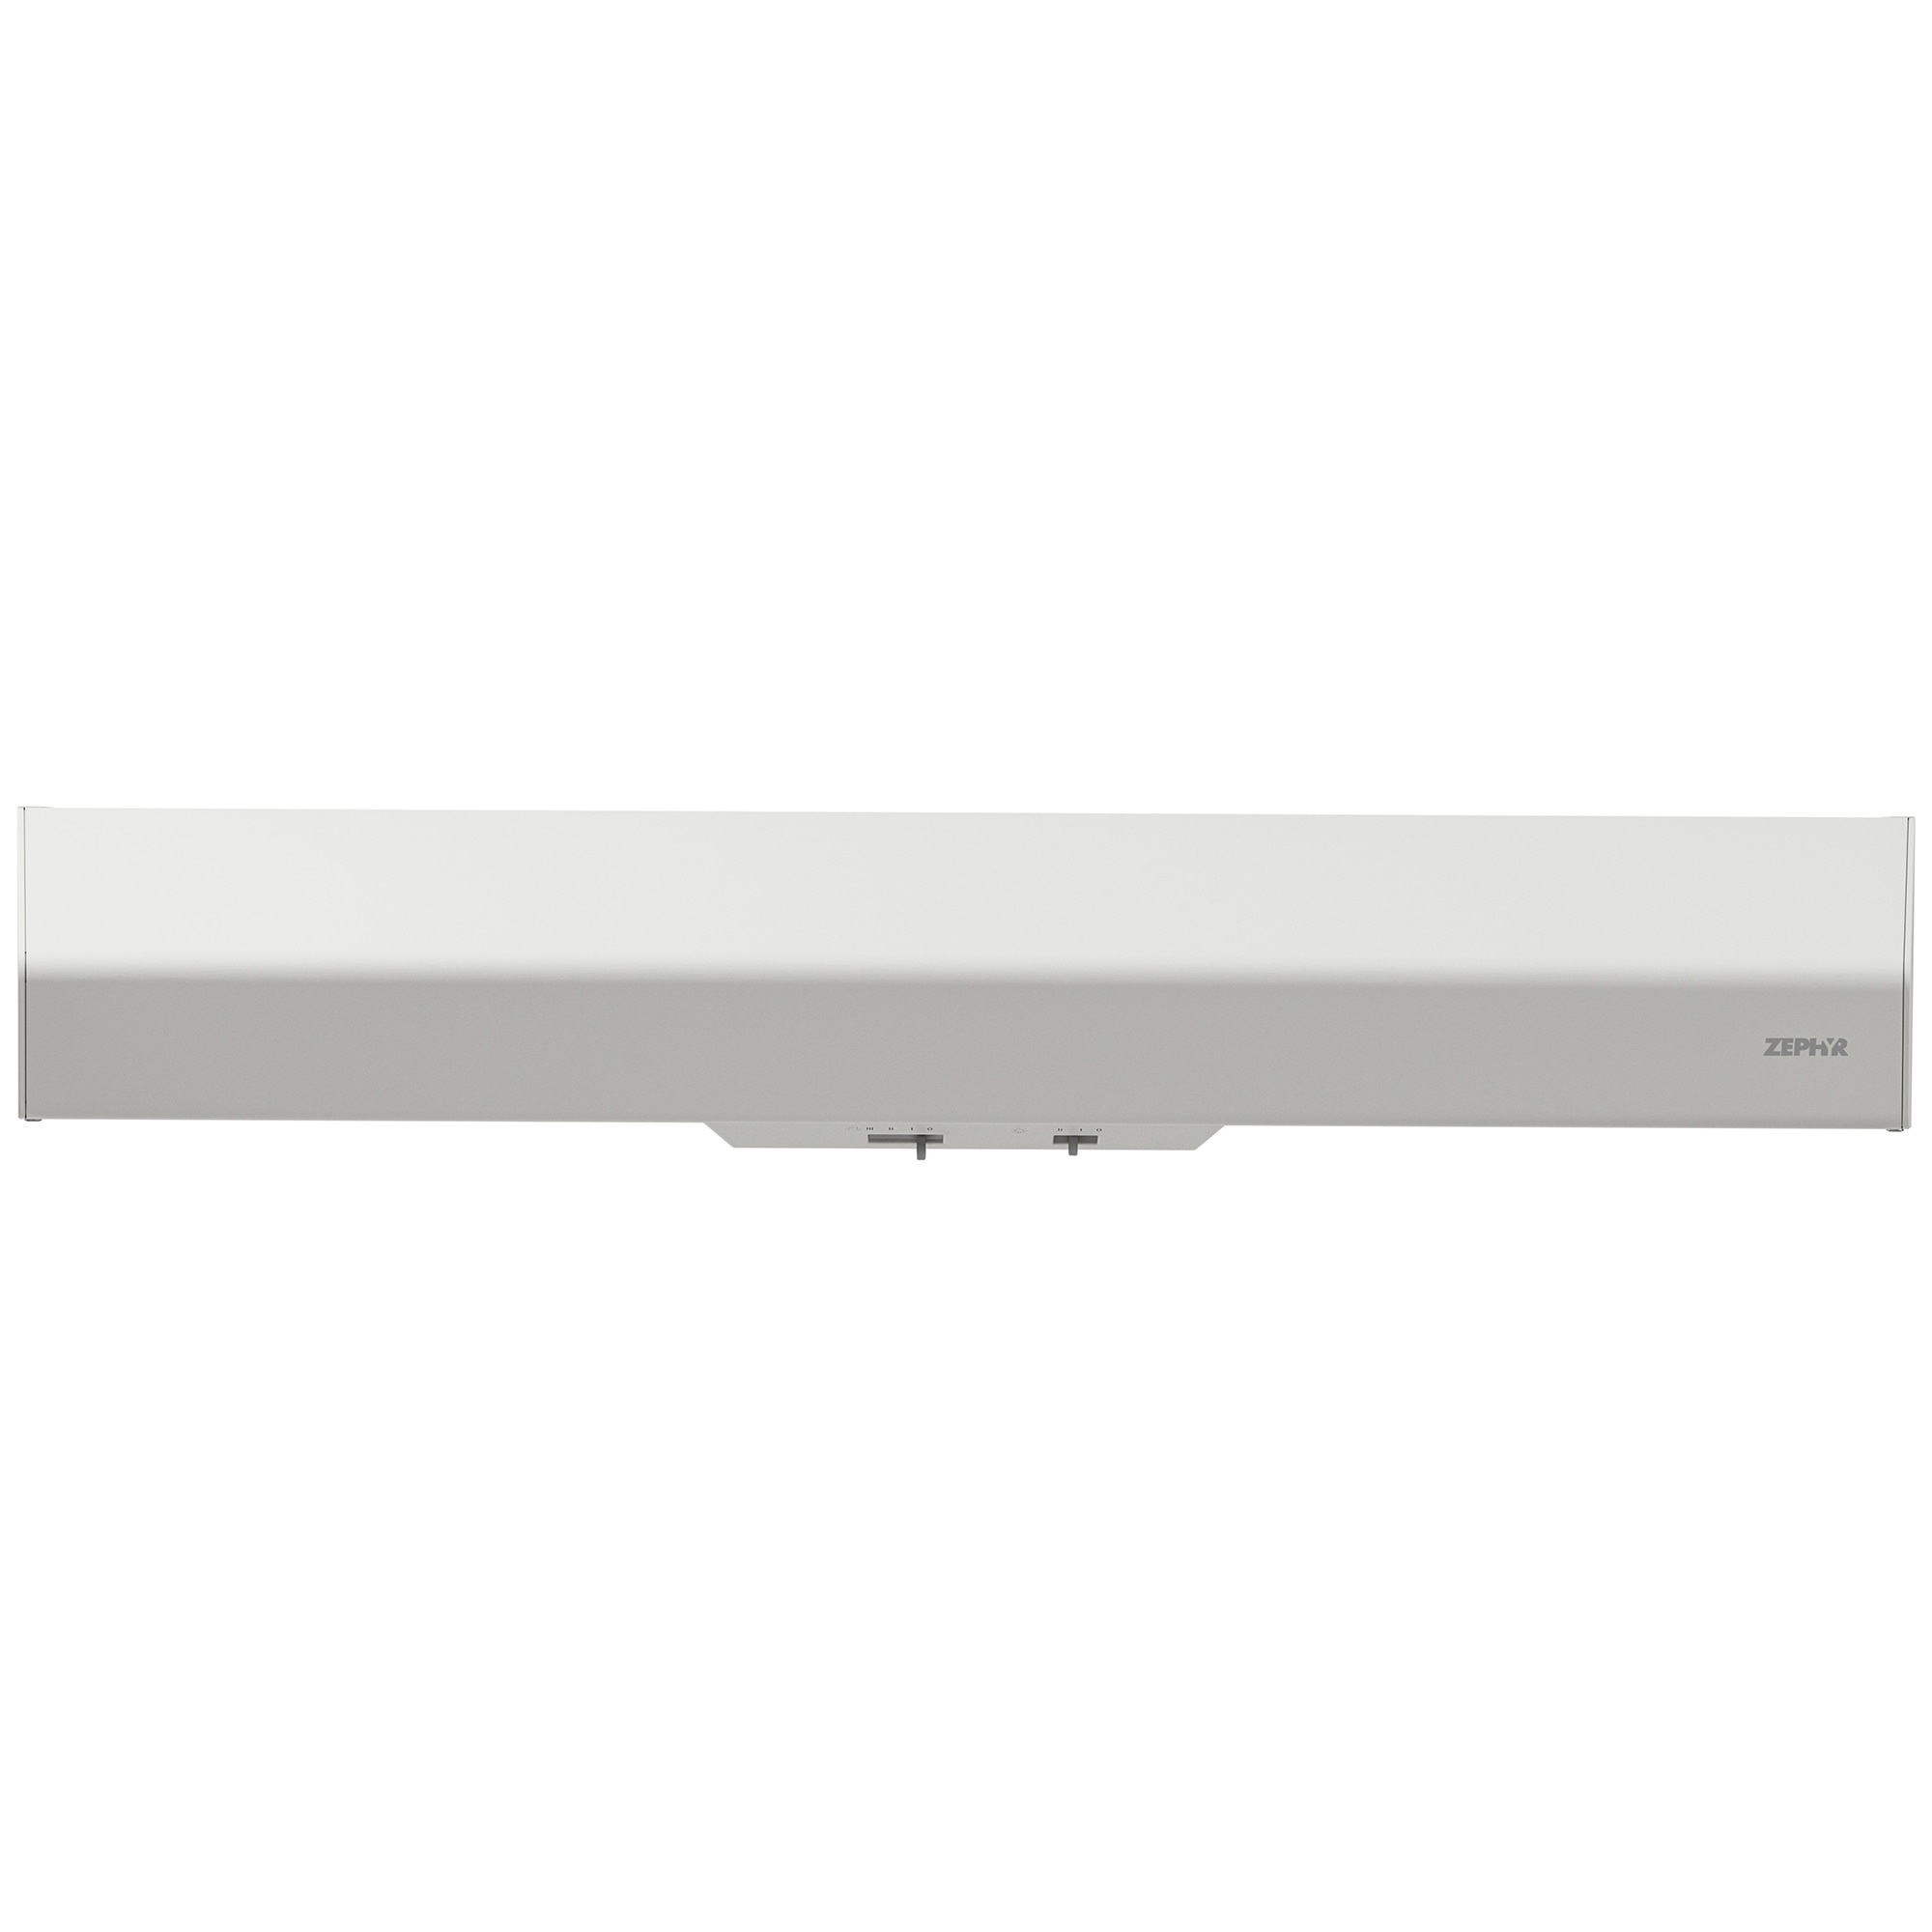 Zephyr Core Collection Breeze I Series 30" Standard Style Range Hood with 3 Speed Settings, 250 CFM, Convertible Venting & 2 LED Lights - White (AK1100BW)